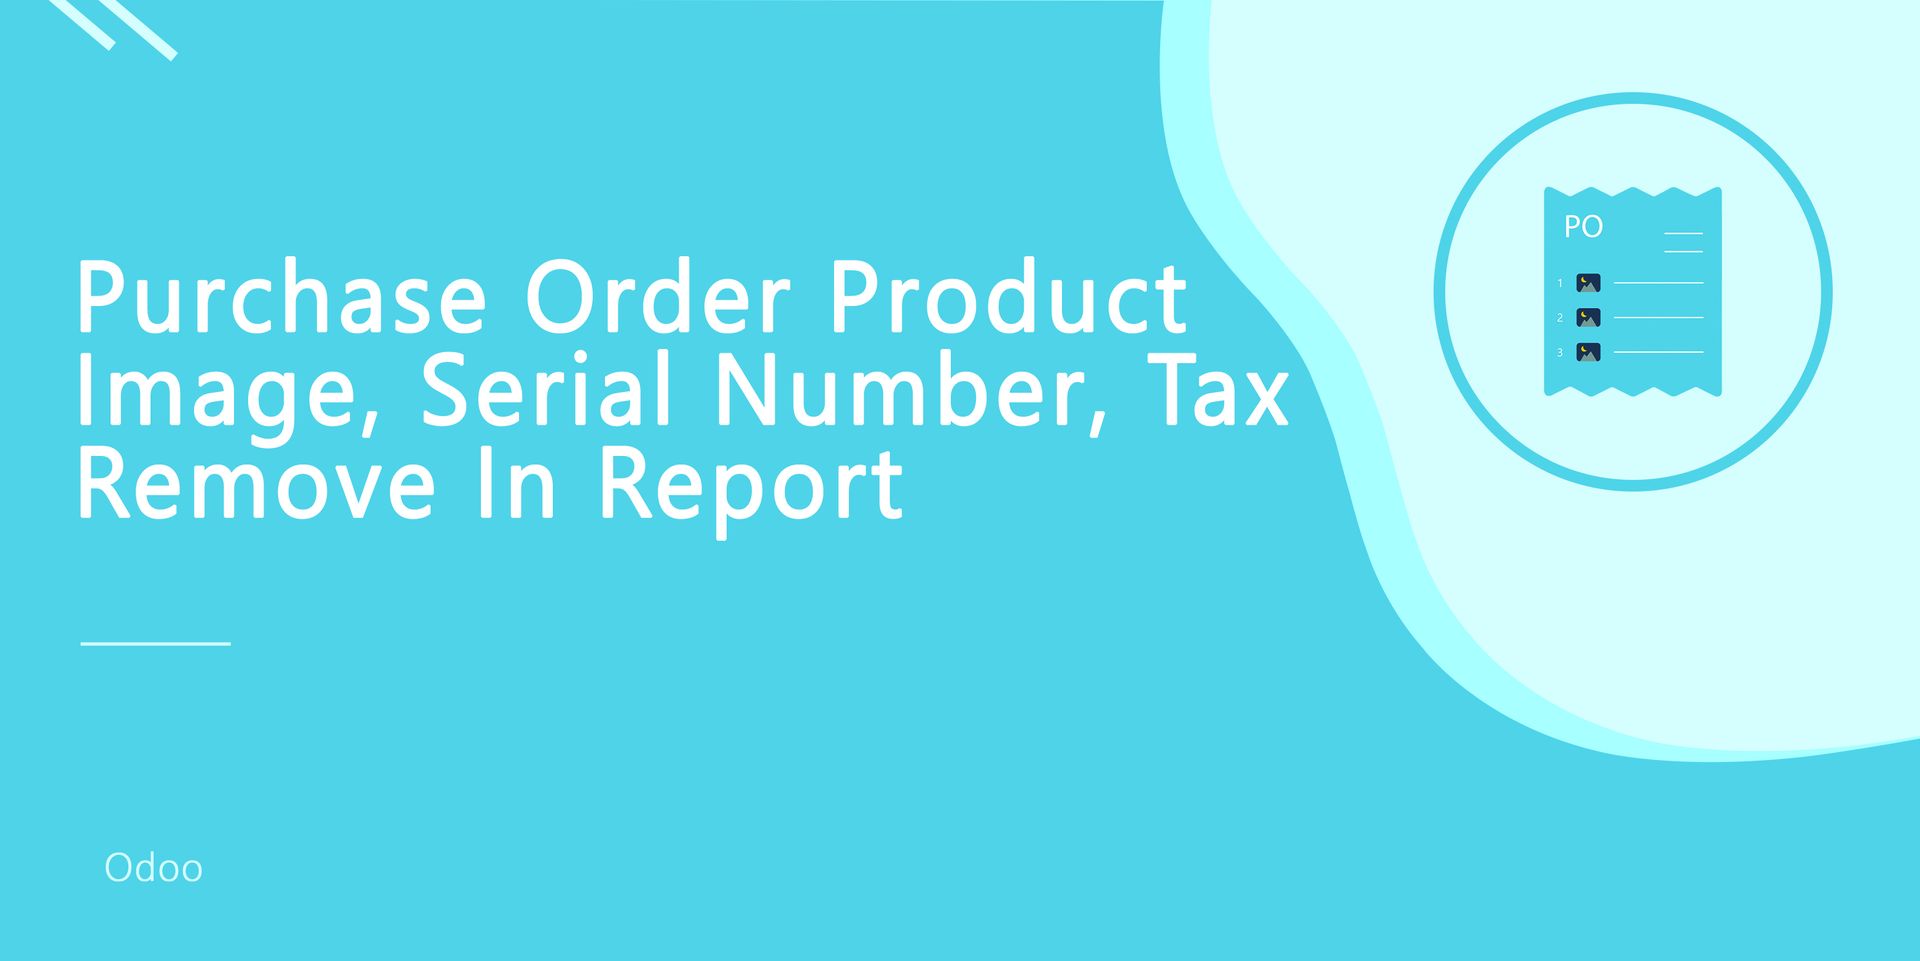 Purchase Order Image, Serial Number, Tax Remove in Report